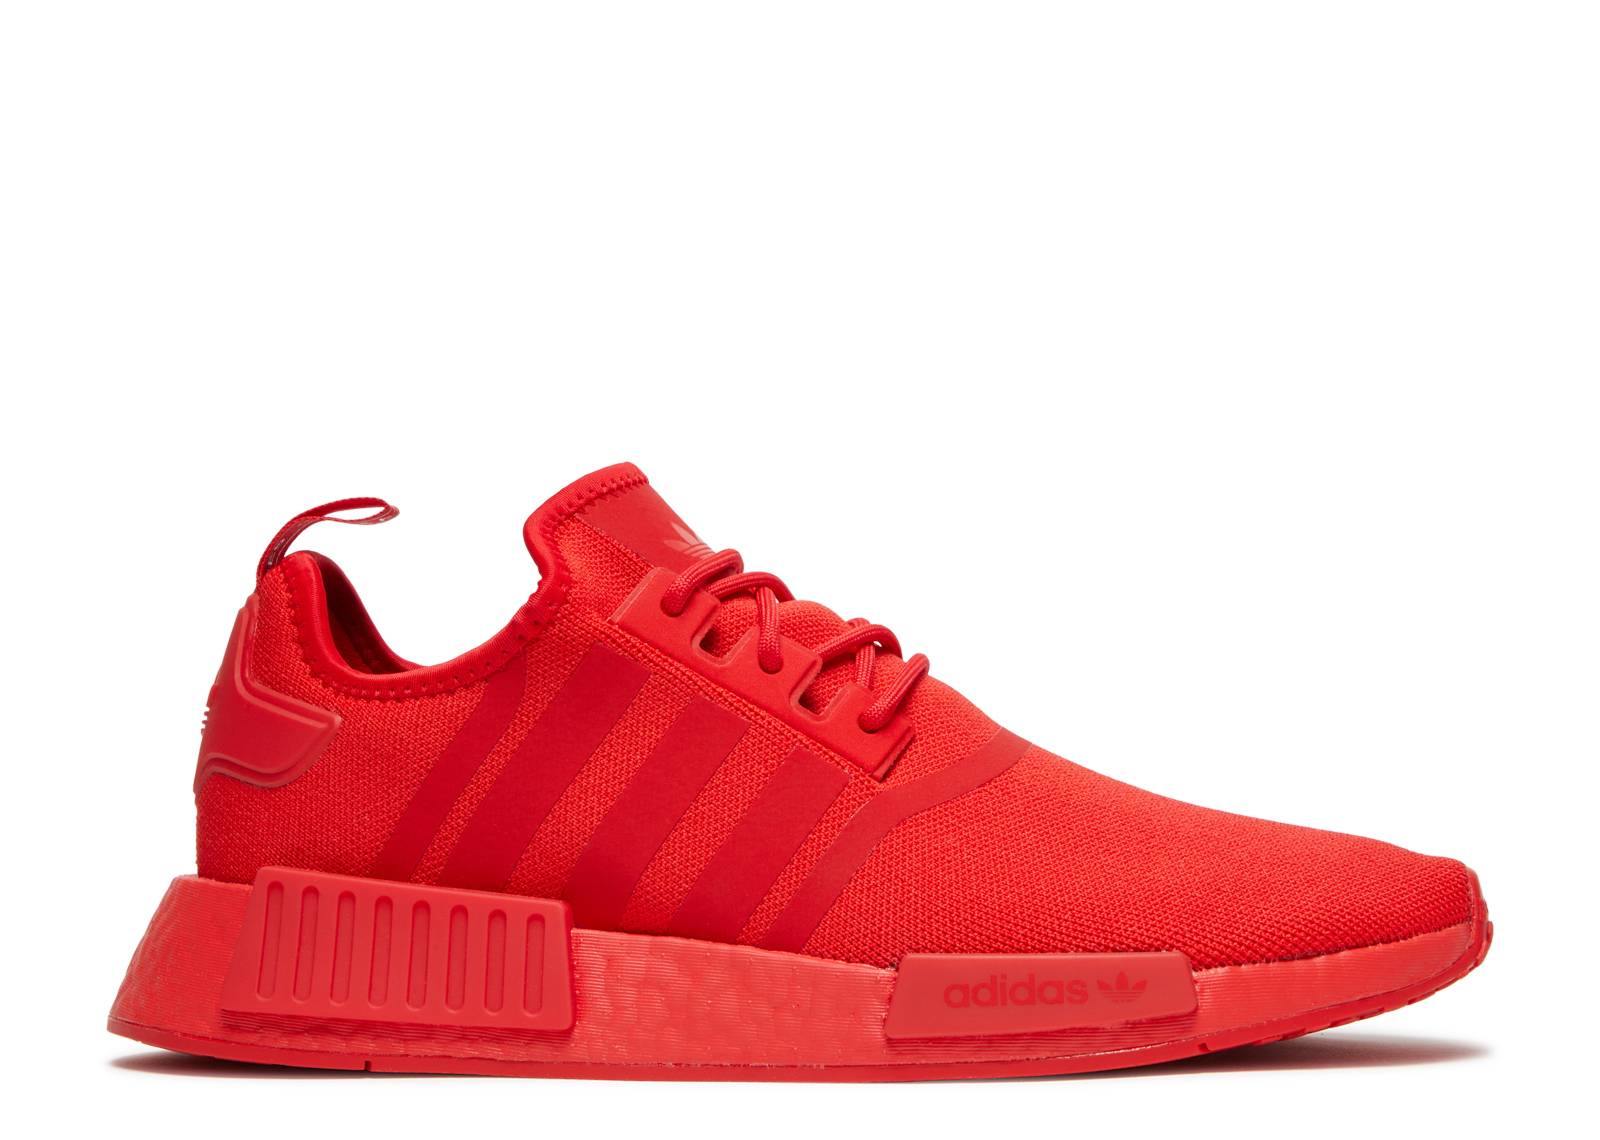 NMD_R1 'Triple Red'